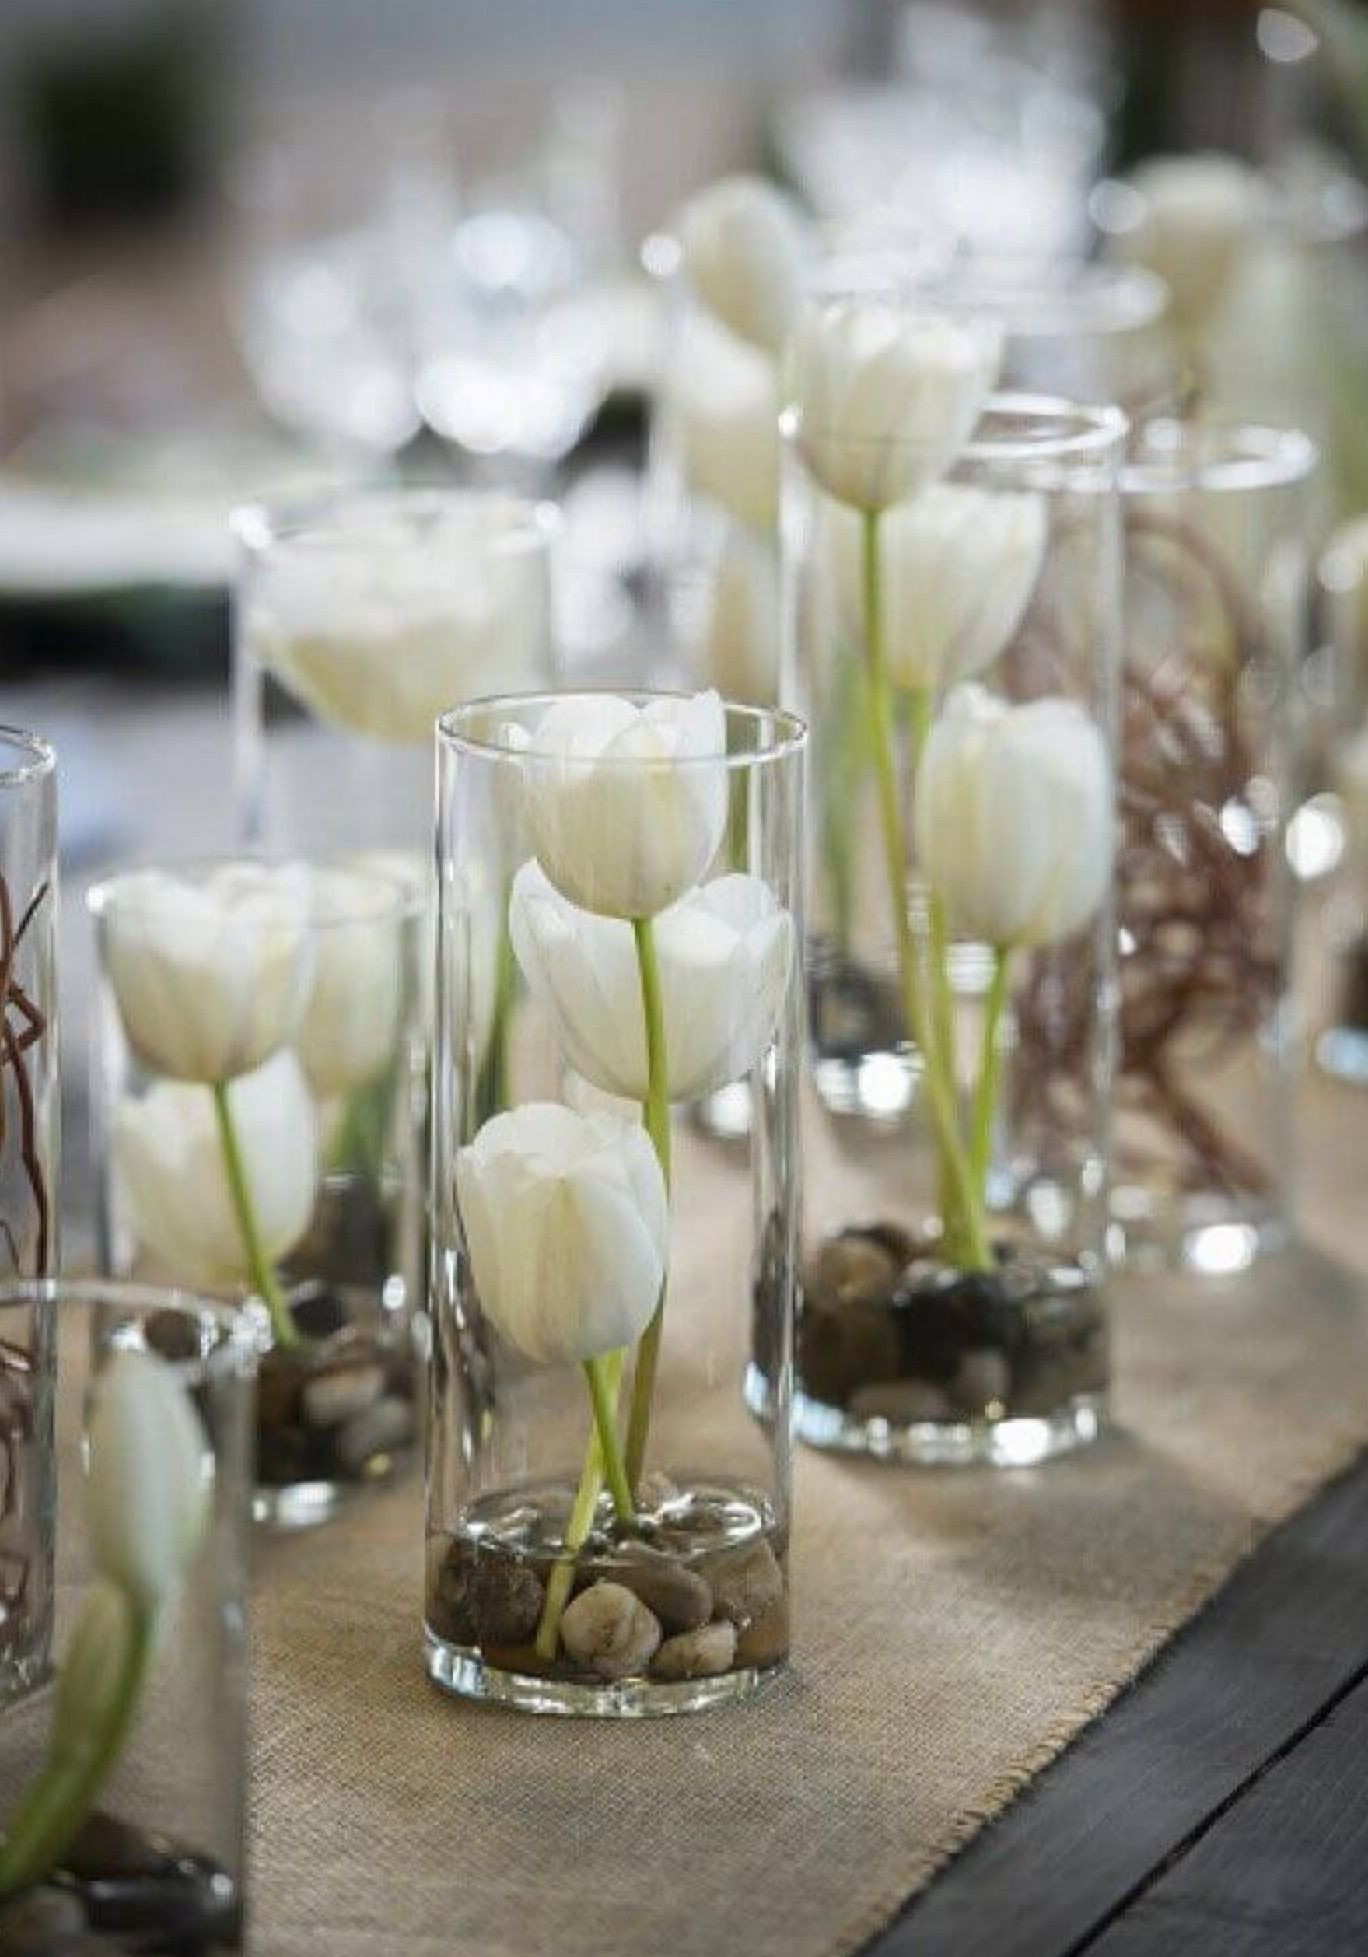 10 Wonderful Tulip Vase Ideas 2024 free download tulip vase ideas of pin by claveau laury on mariage pinterest confirmation wedding for find this pin and more on mariage by claveaulaury